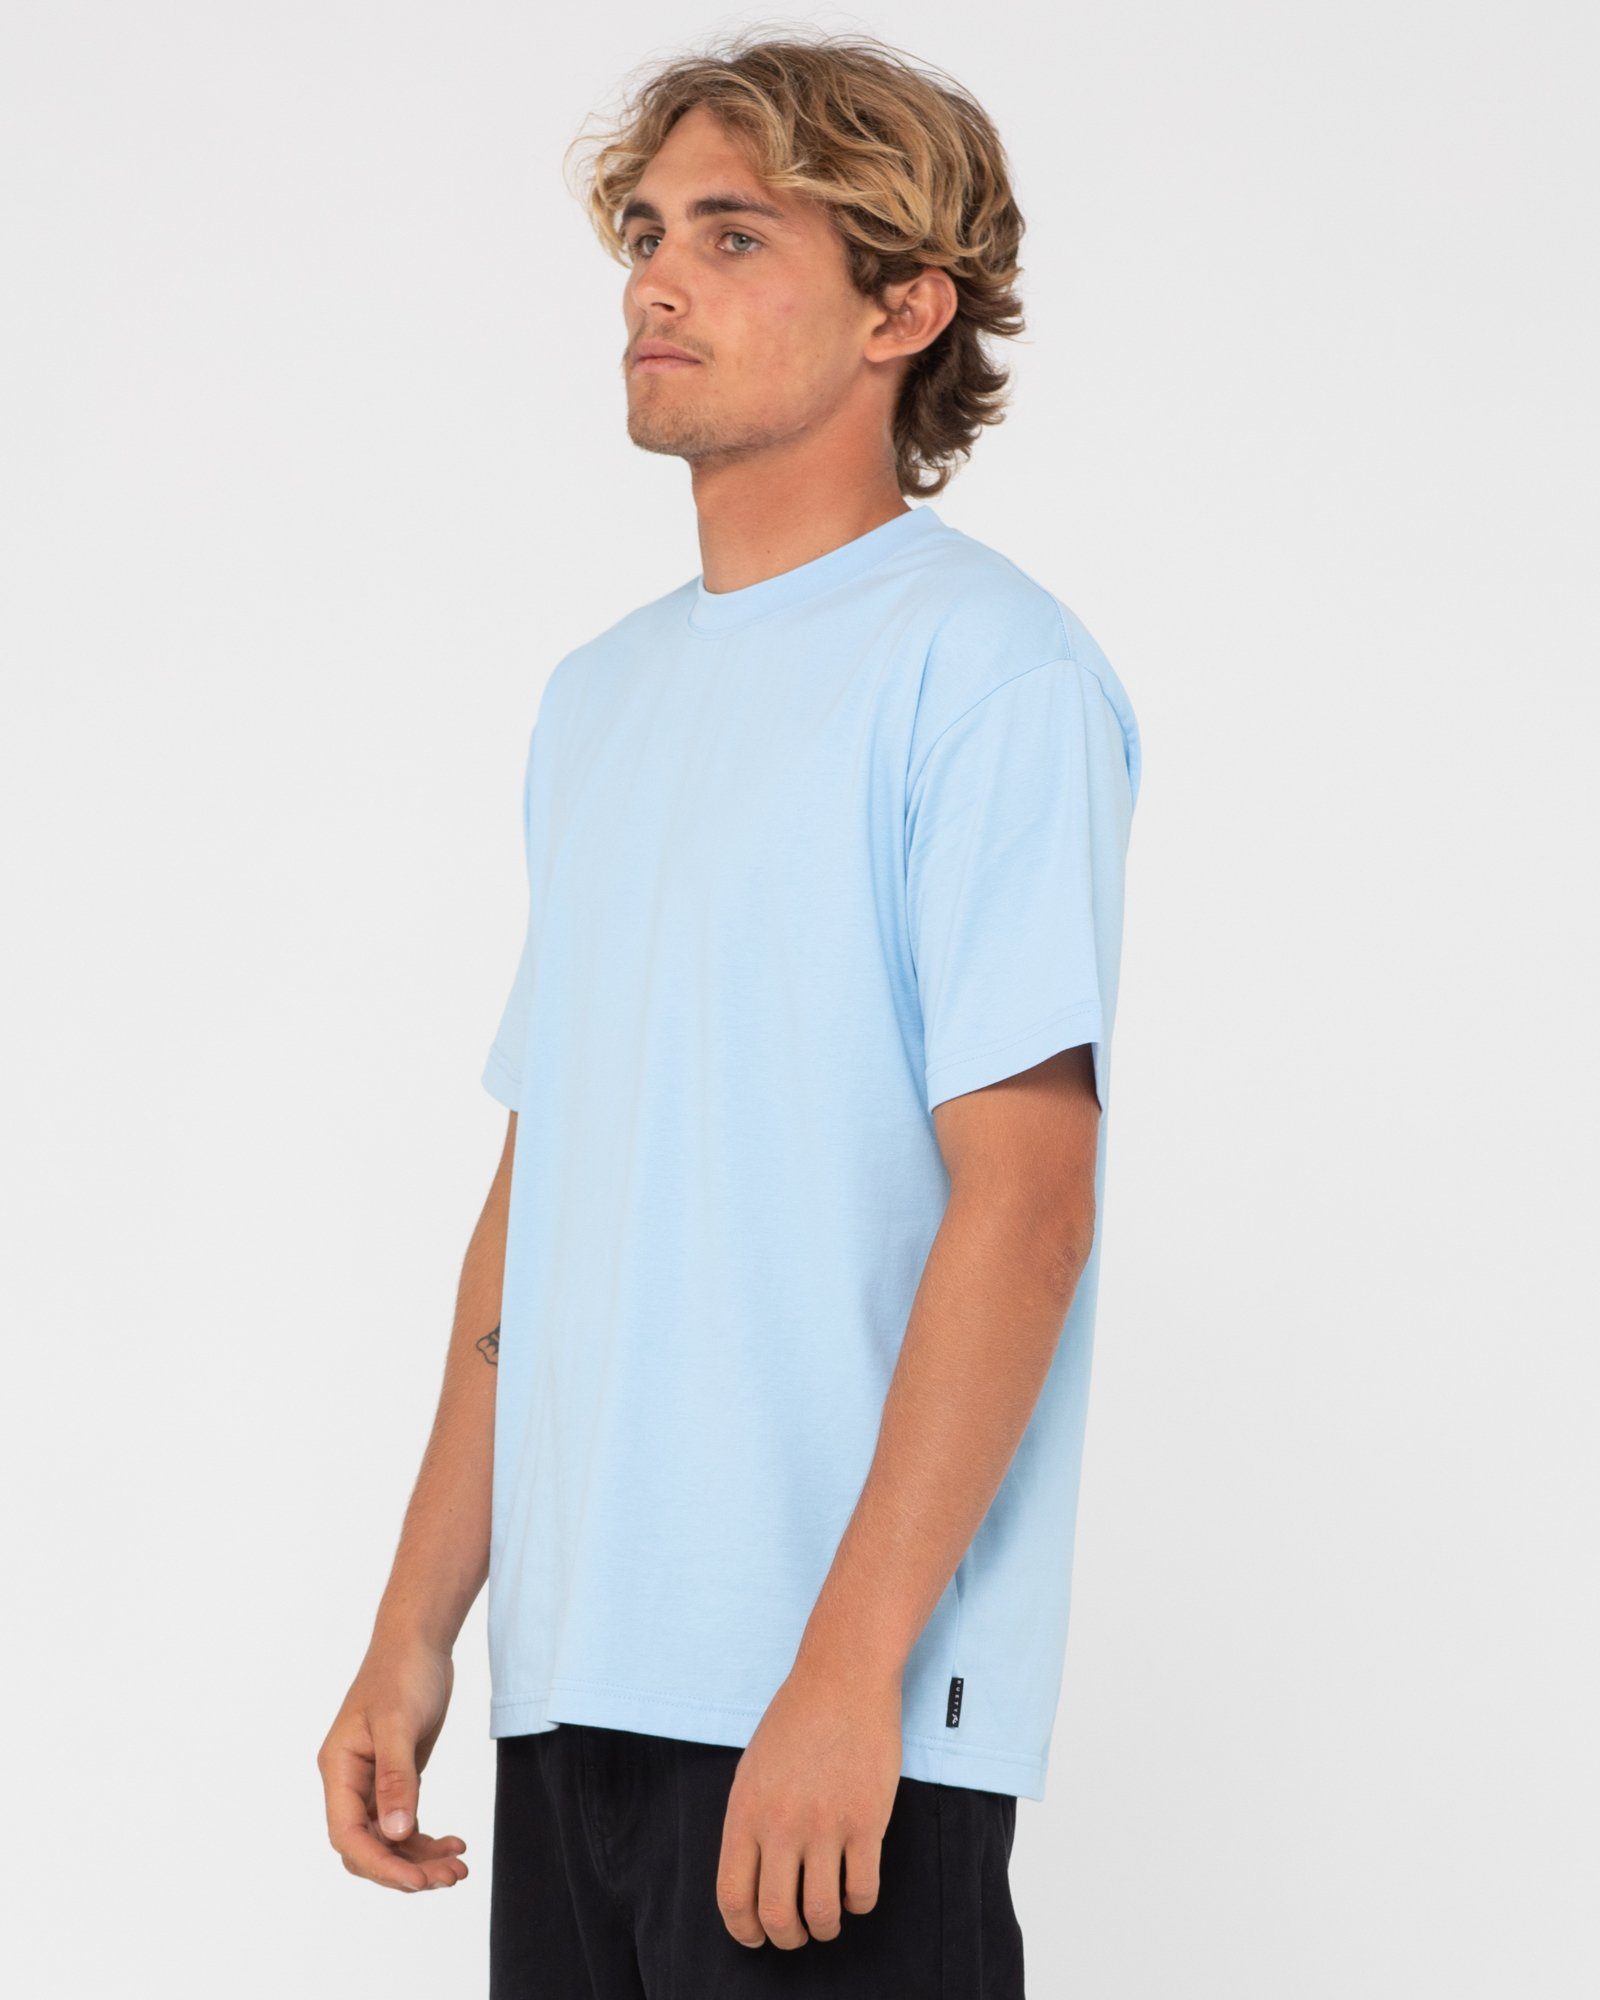 Rusty T-Shirt DELUXE BLANK BLUE PASTEL S/S TEE